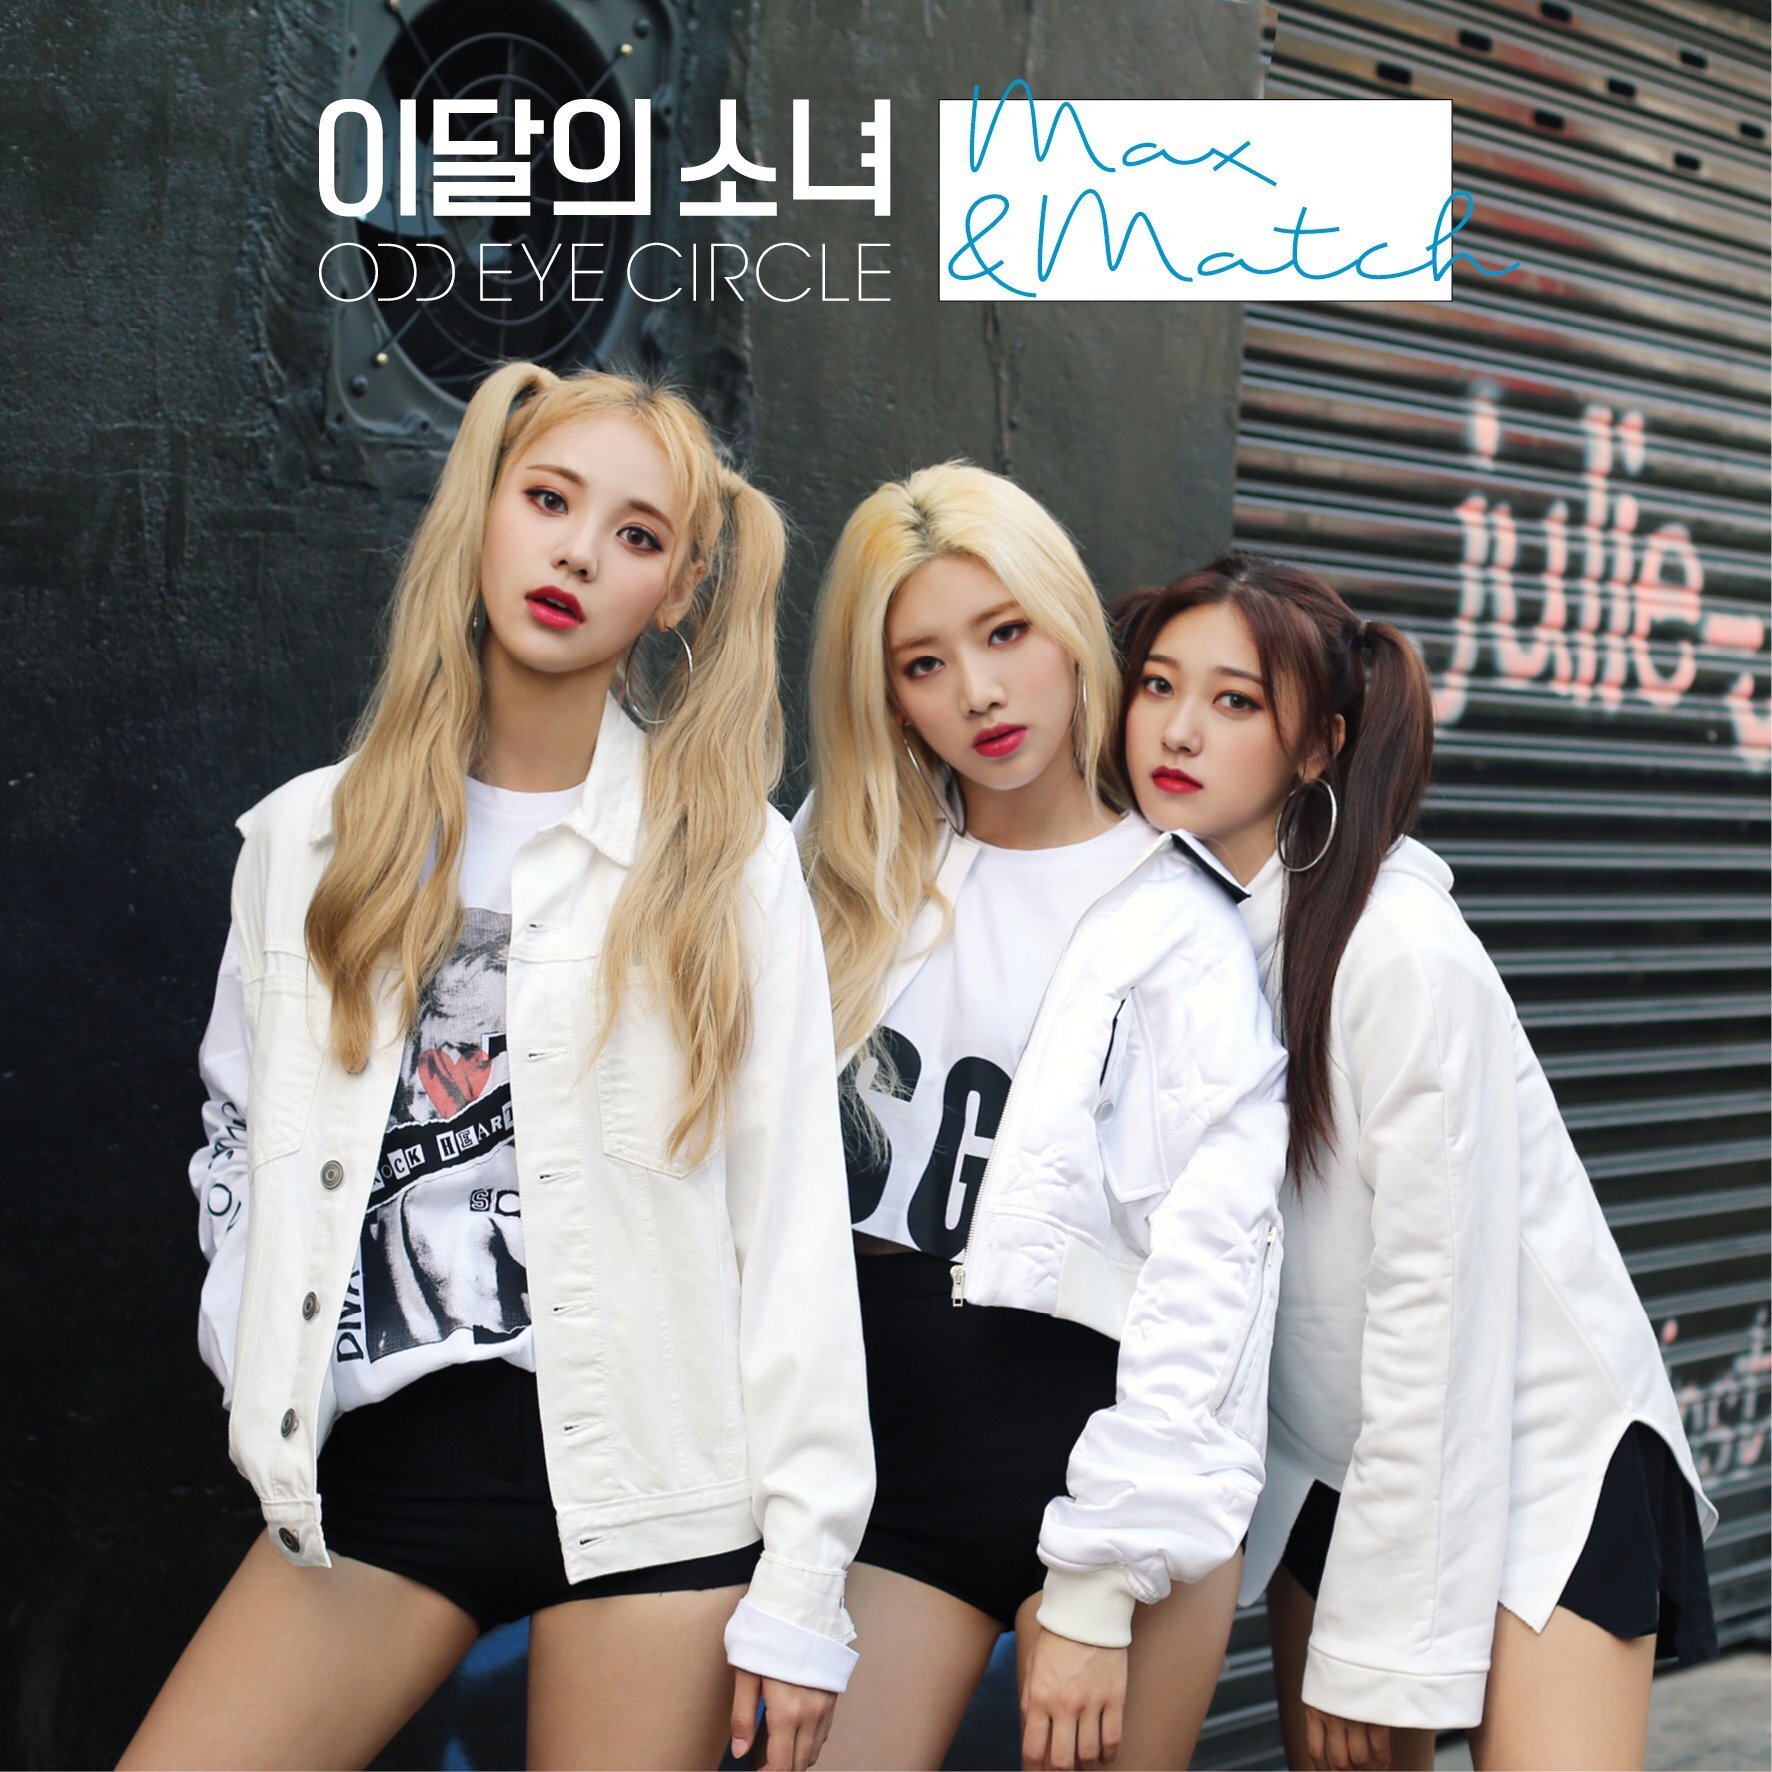 LOONA ODD EYE CIRCLE - 'Max & Match' Concept teaser images | kpopping